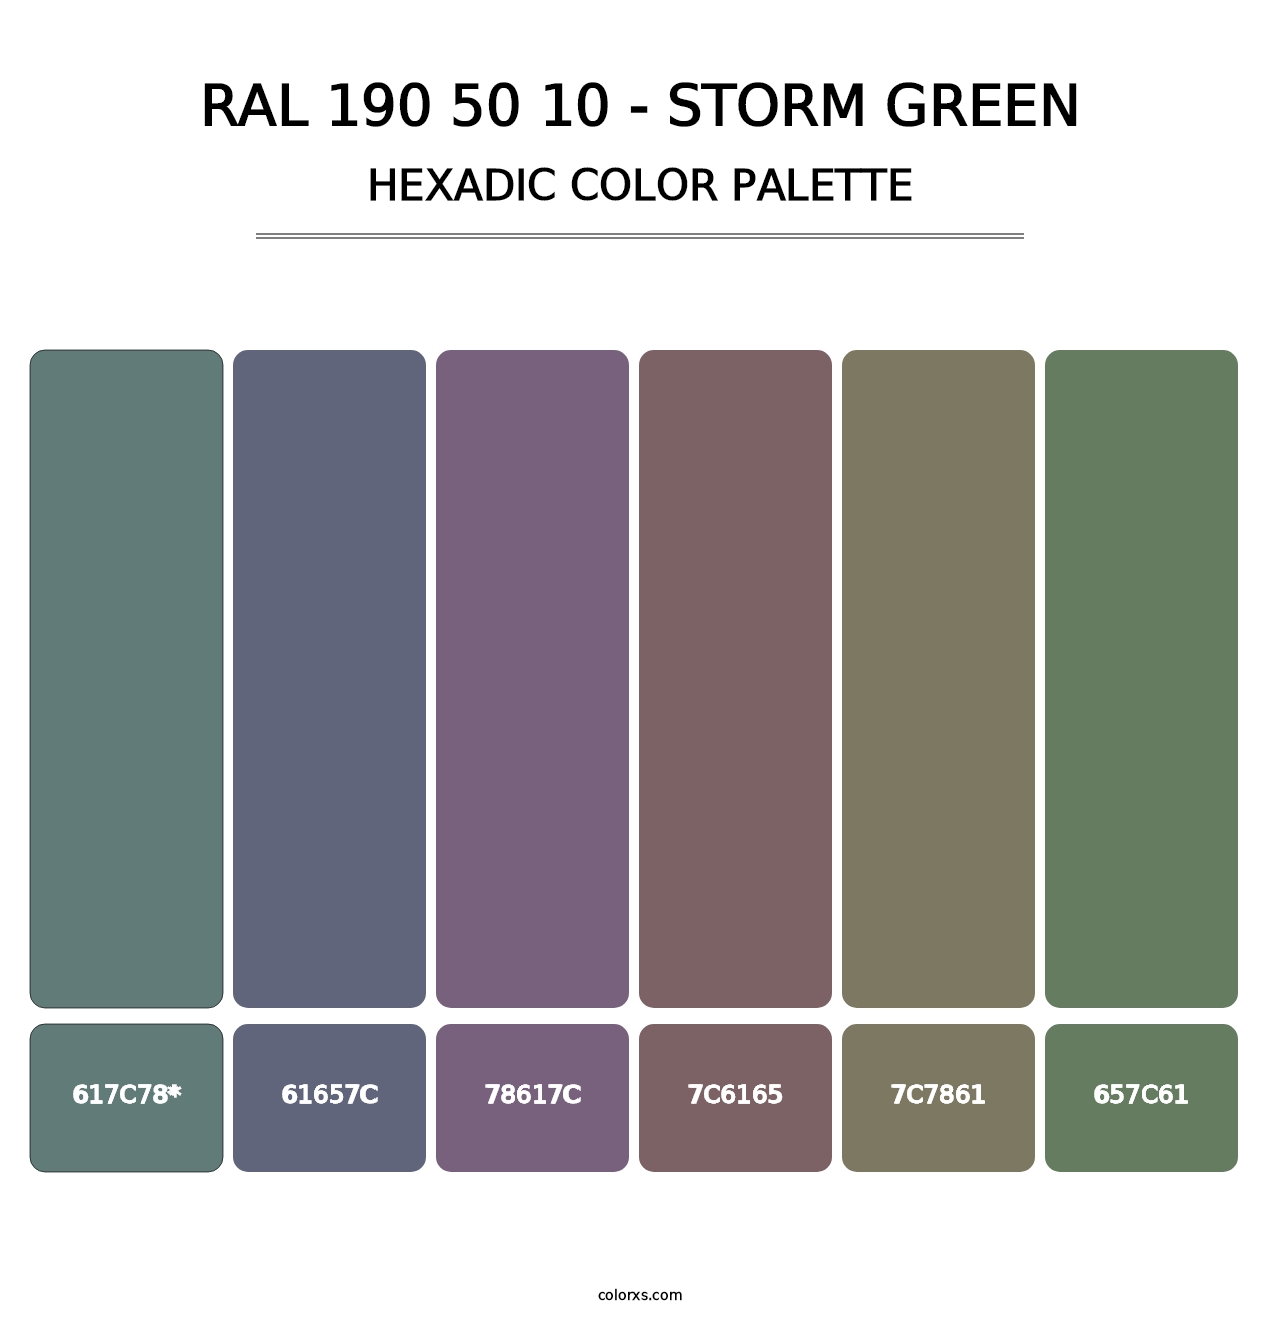 RAL 190 50 10 - Storm Green - Hexadic Color Palette